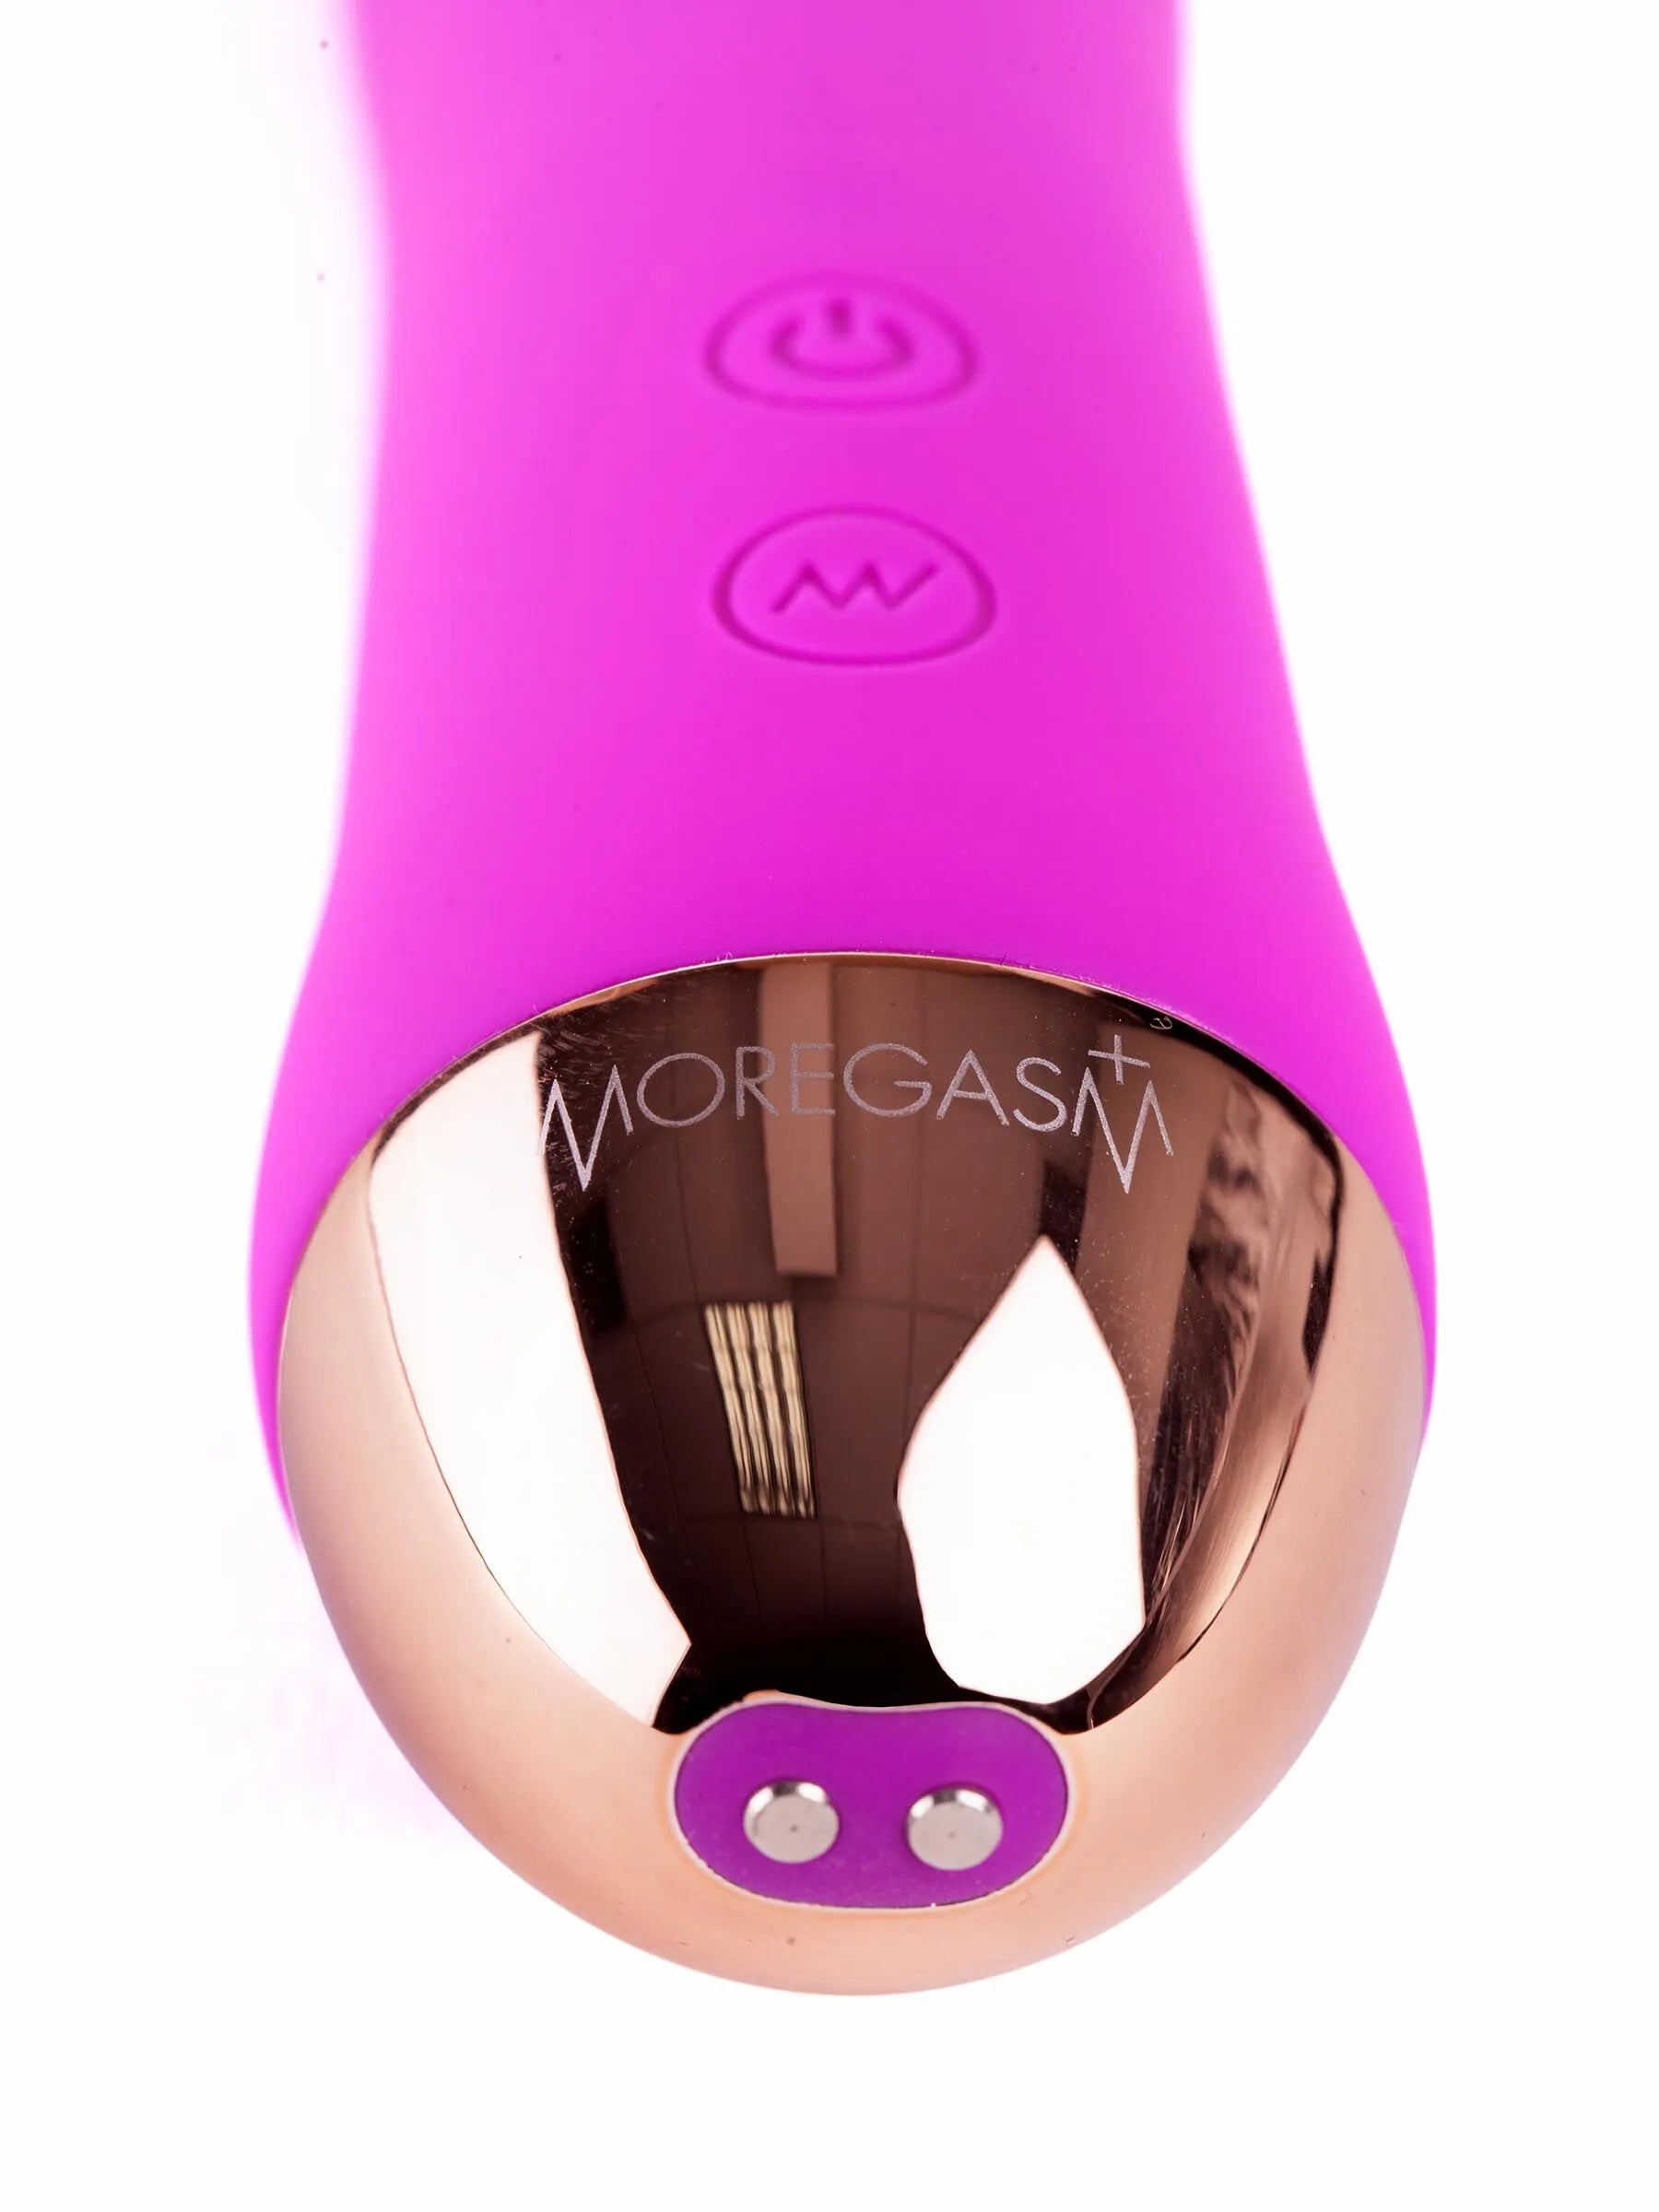 Moregasm Plus Boost G Spot From Ann Summers, Image 03